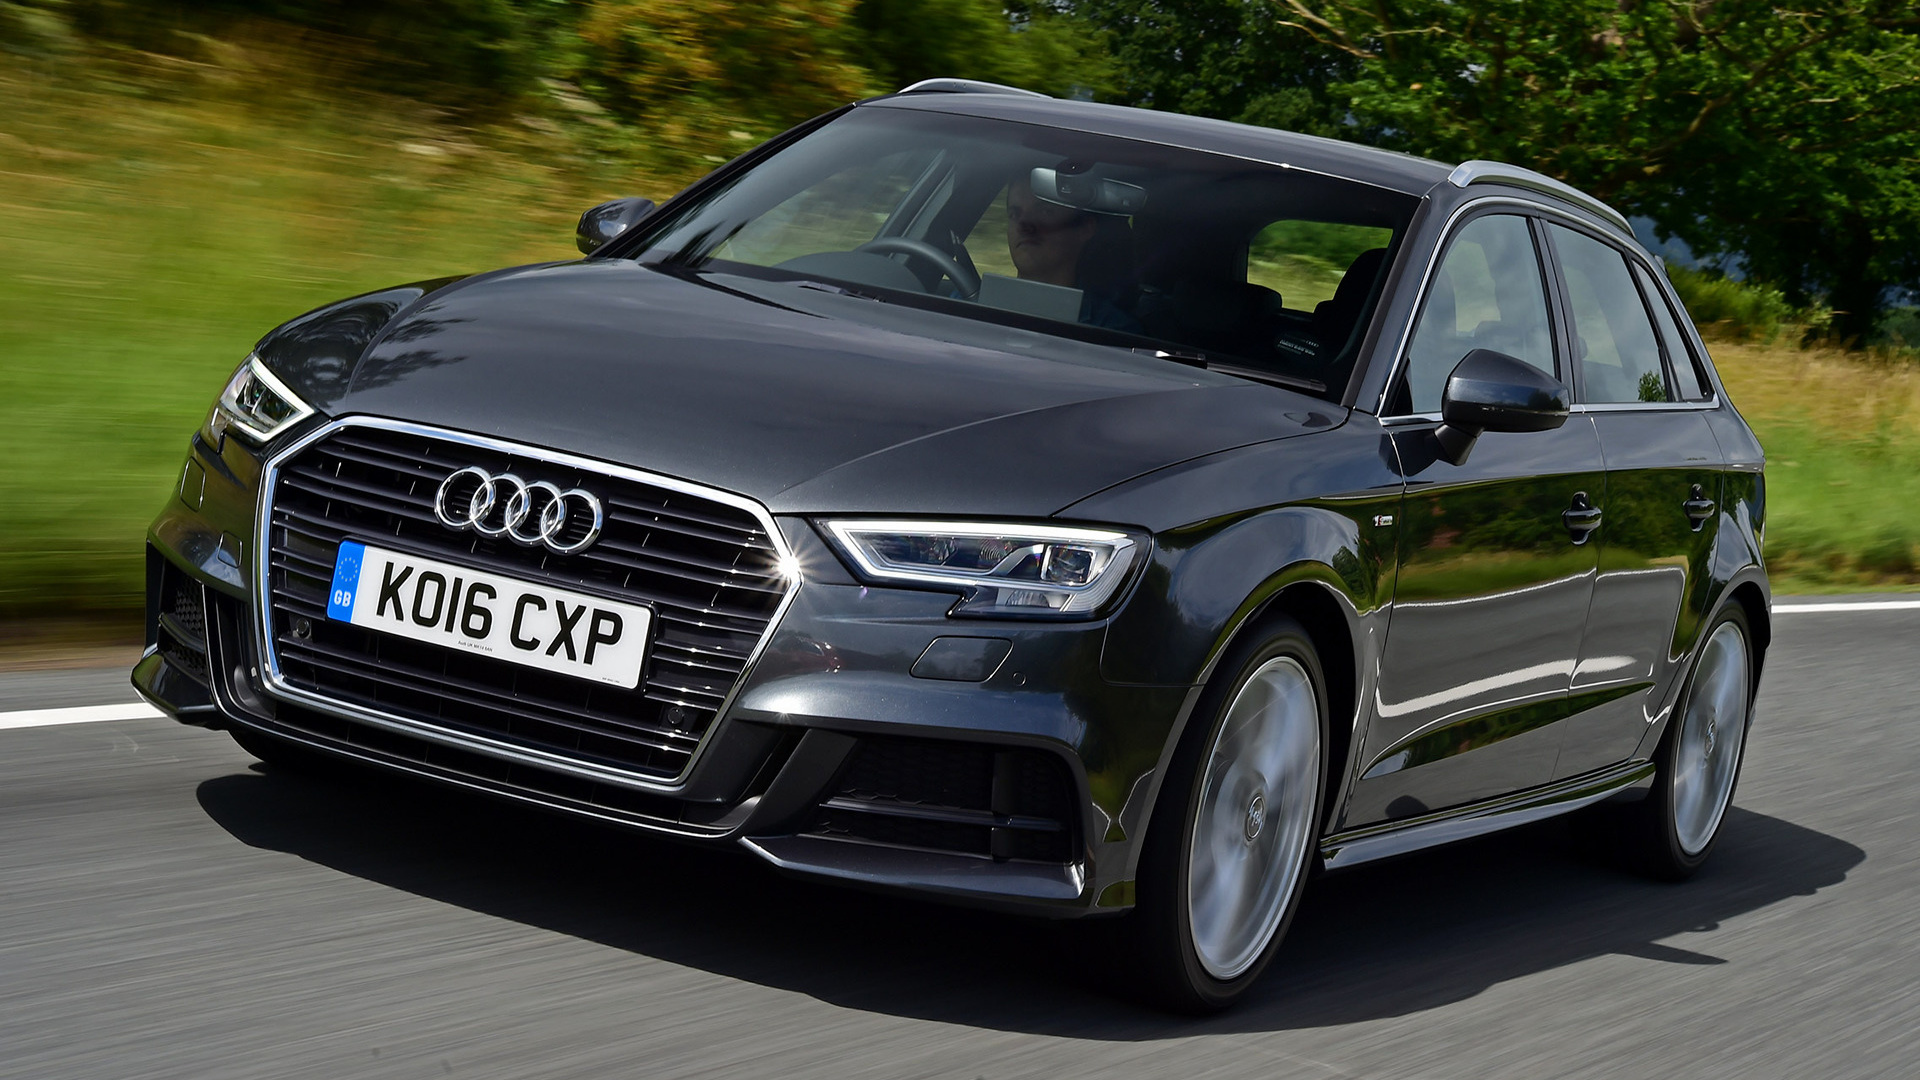 Audi A3, S Line edition, Sporty styling, Exceptional performance, 1920x1080 Full HD Desktop